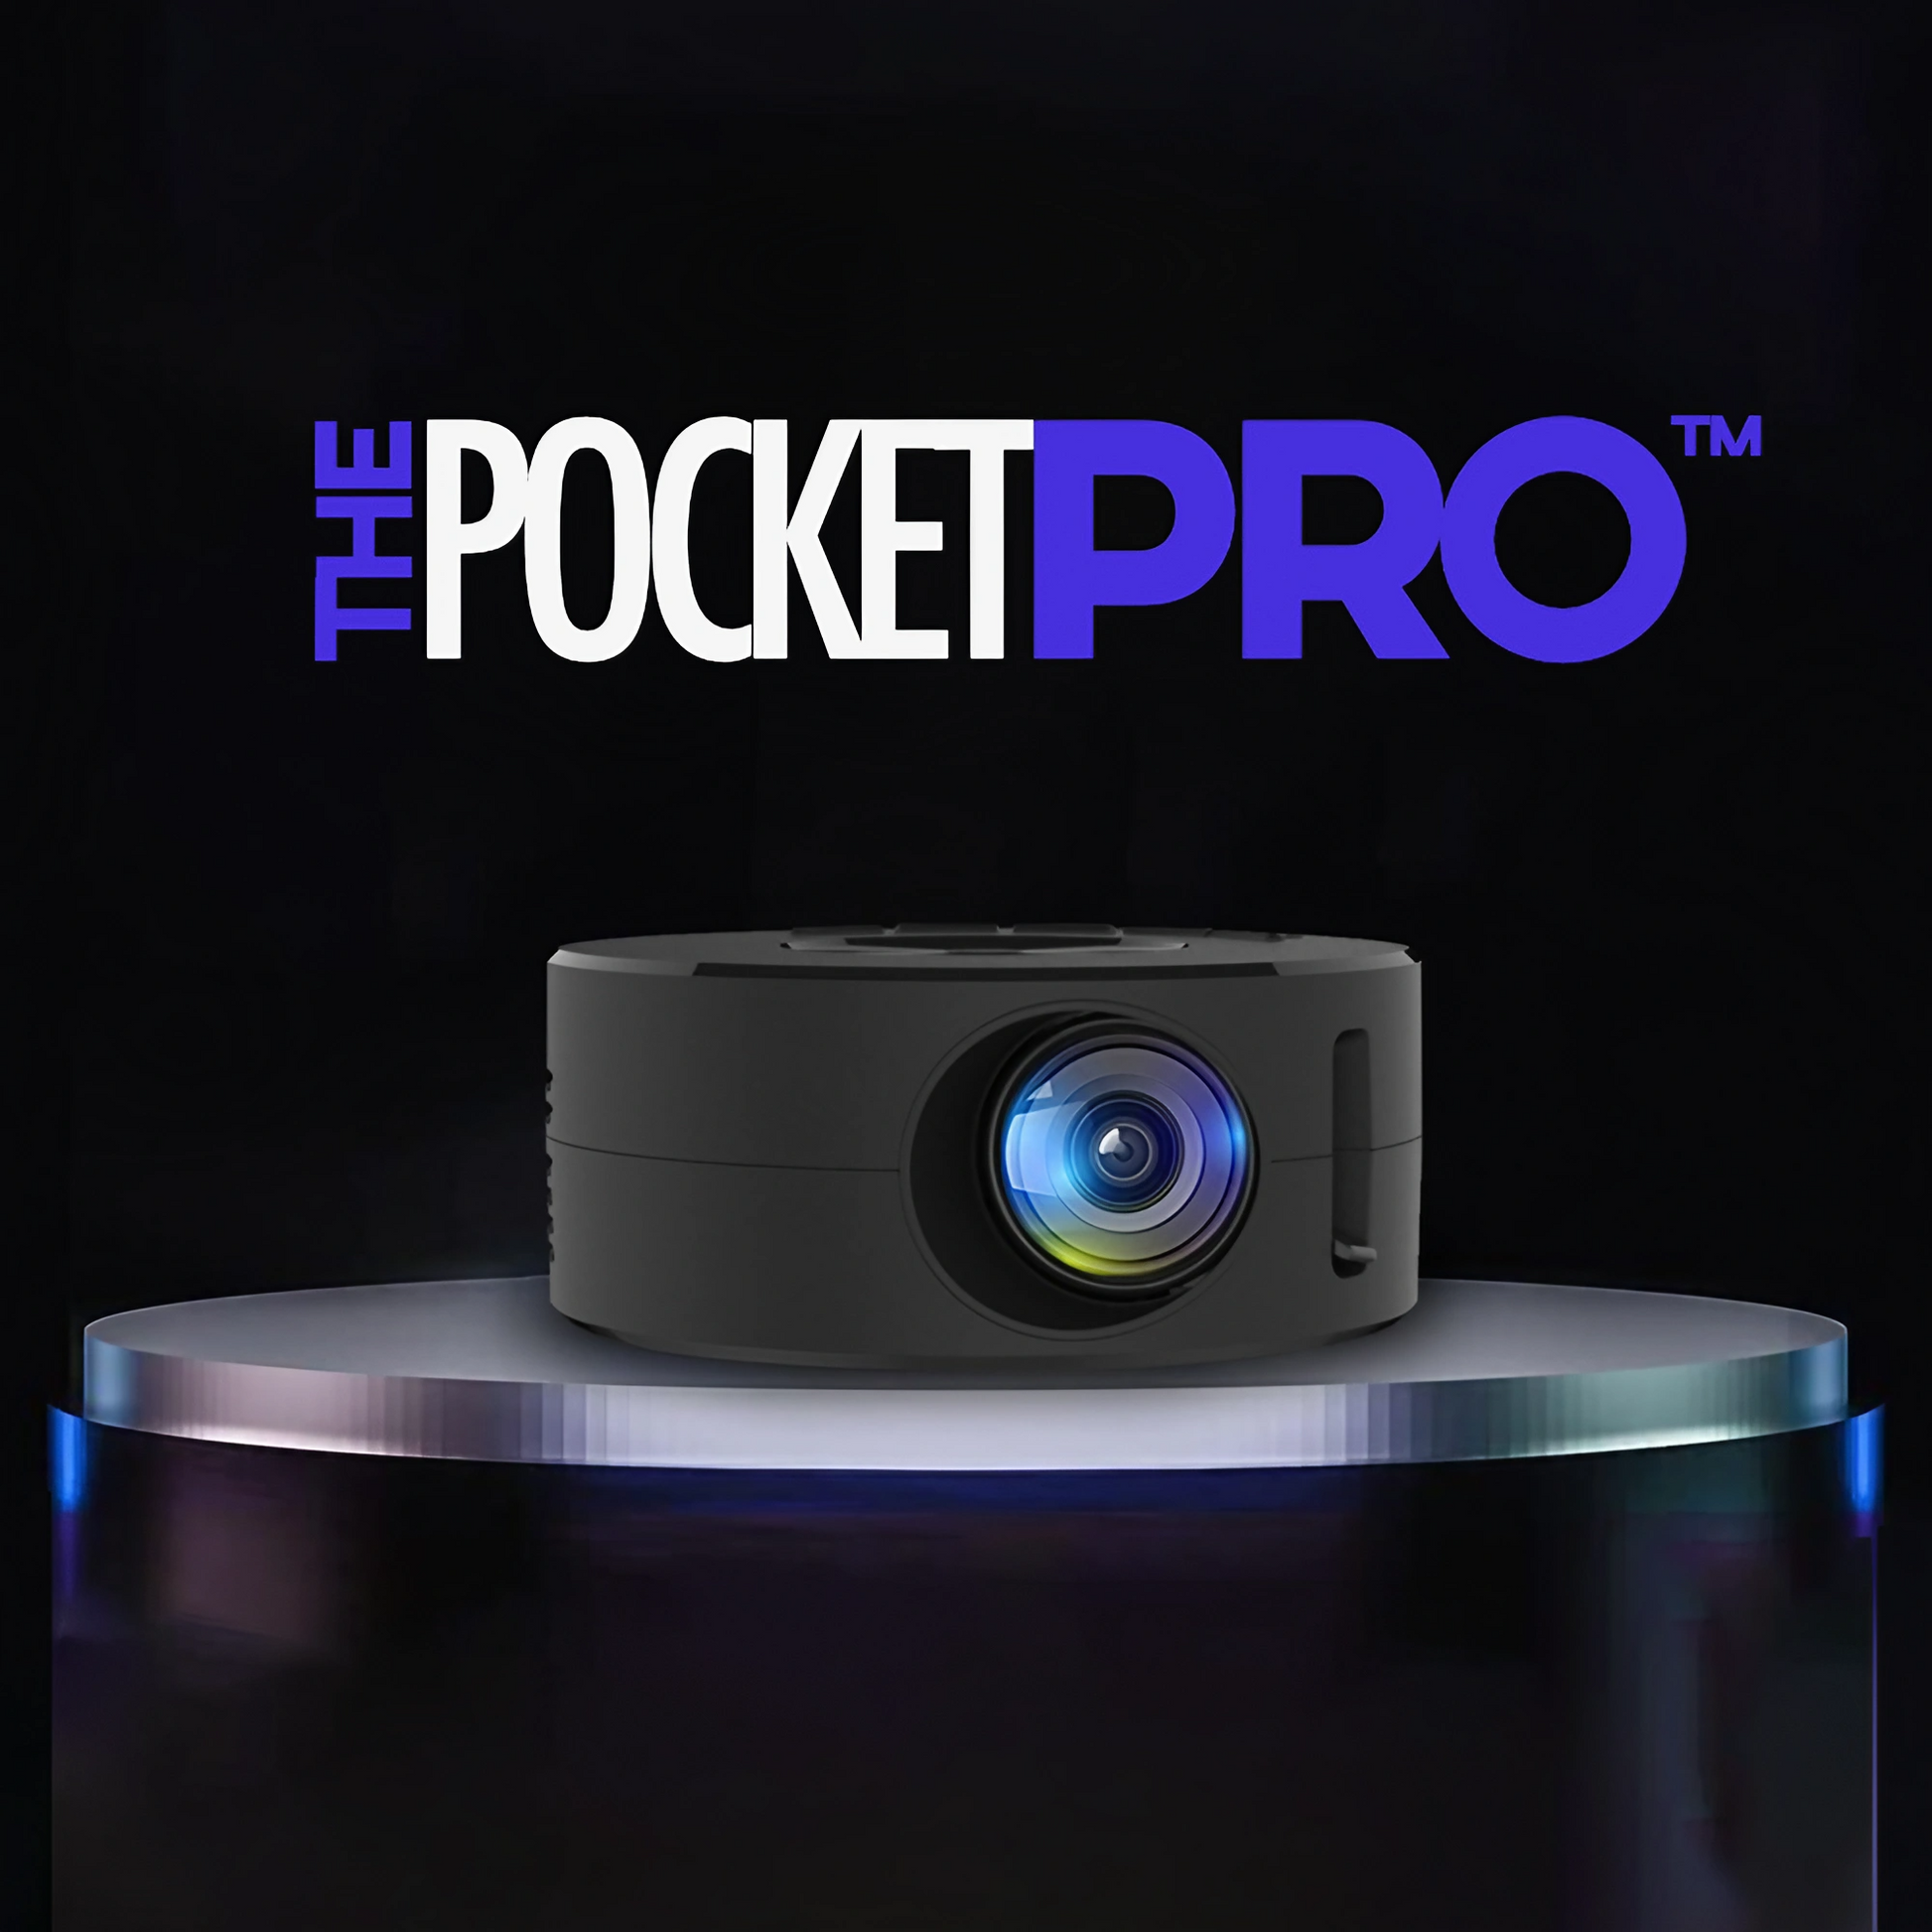 The PocketPro's™ sleek and compact design is perfect for portability and easy storage, making it your go-to entertainment gadget.